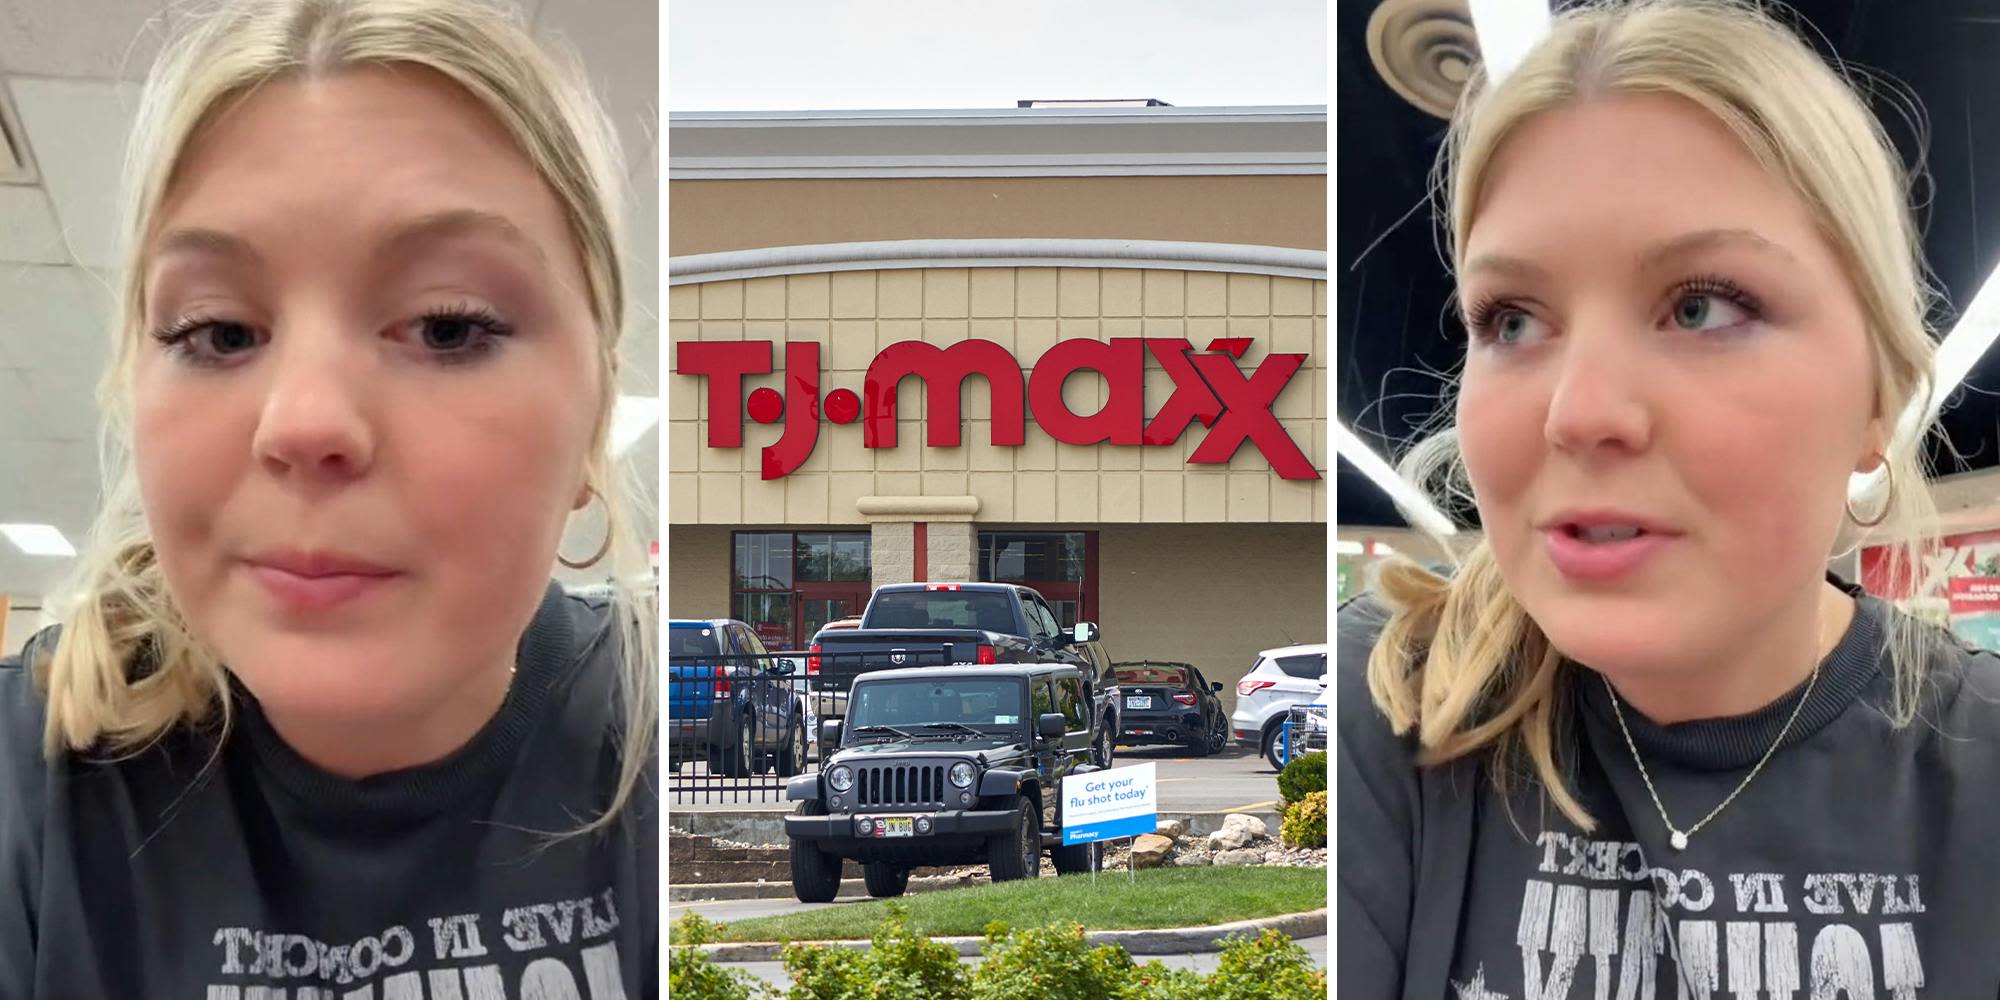 'Please do be afraid to touch my bins': Shopper shares best to way shop at T.J. Maxx to find good deals. Workers aren't so sure